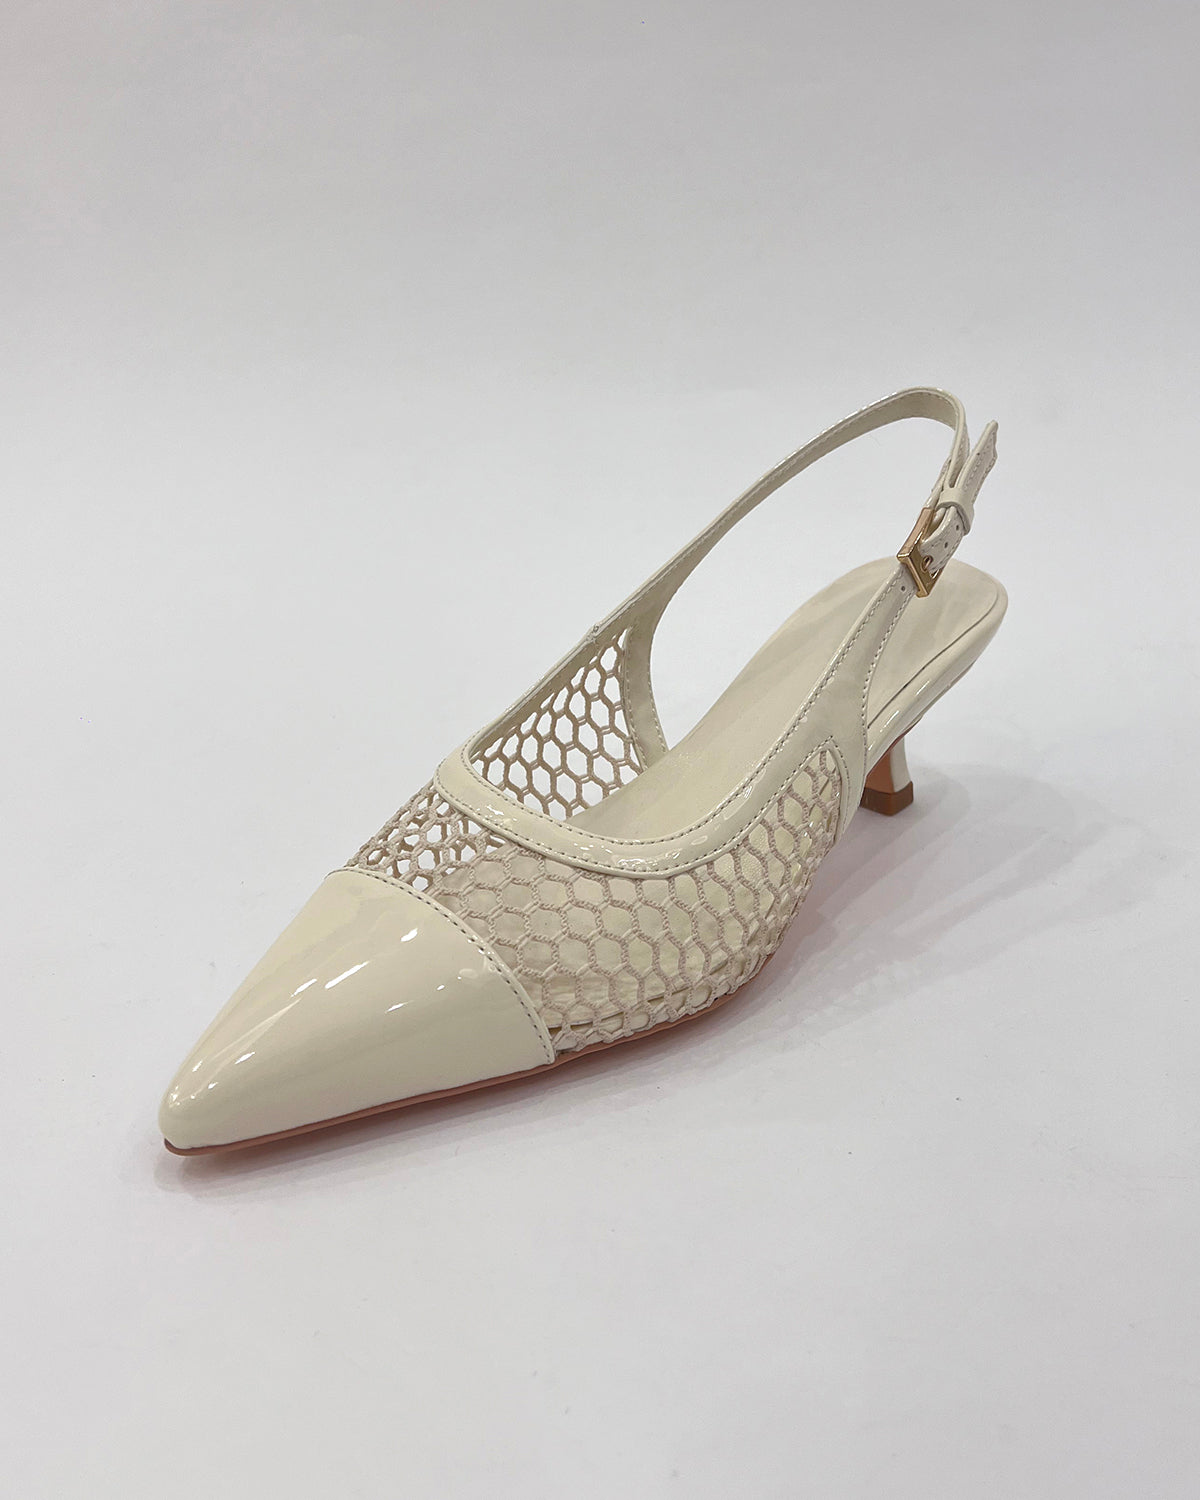 Patent leather pointed toe slingback mesh low heels for women